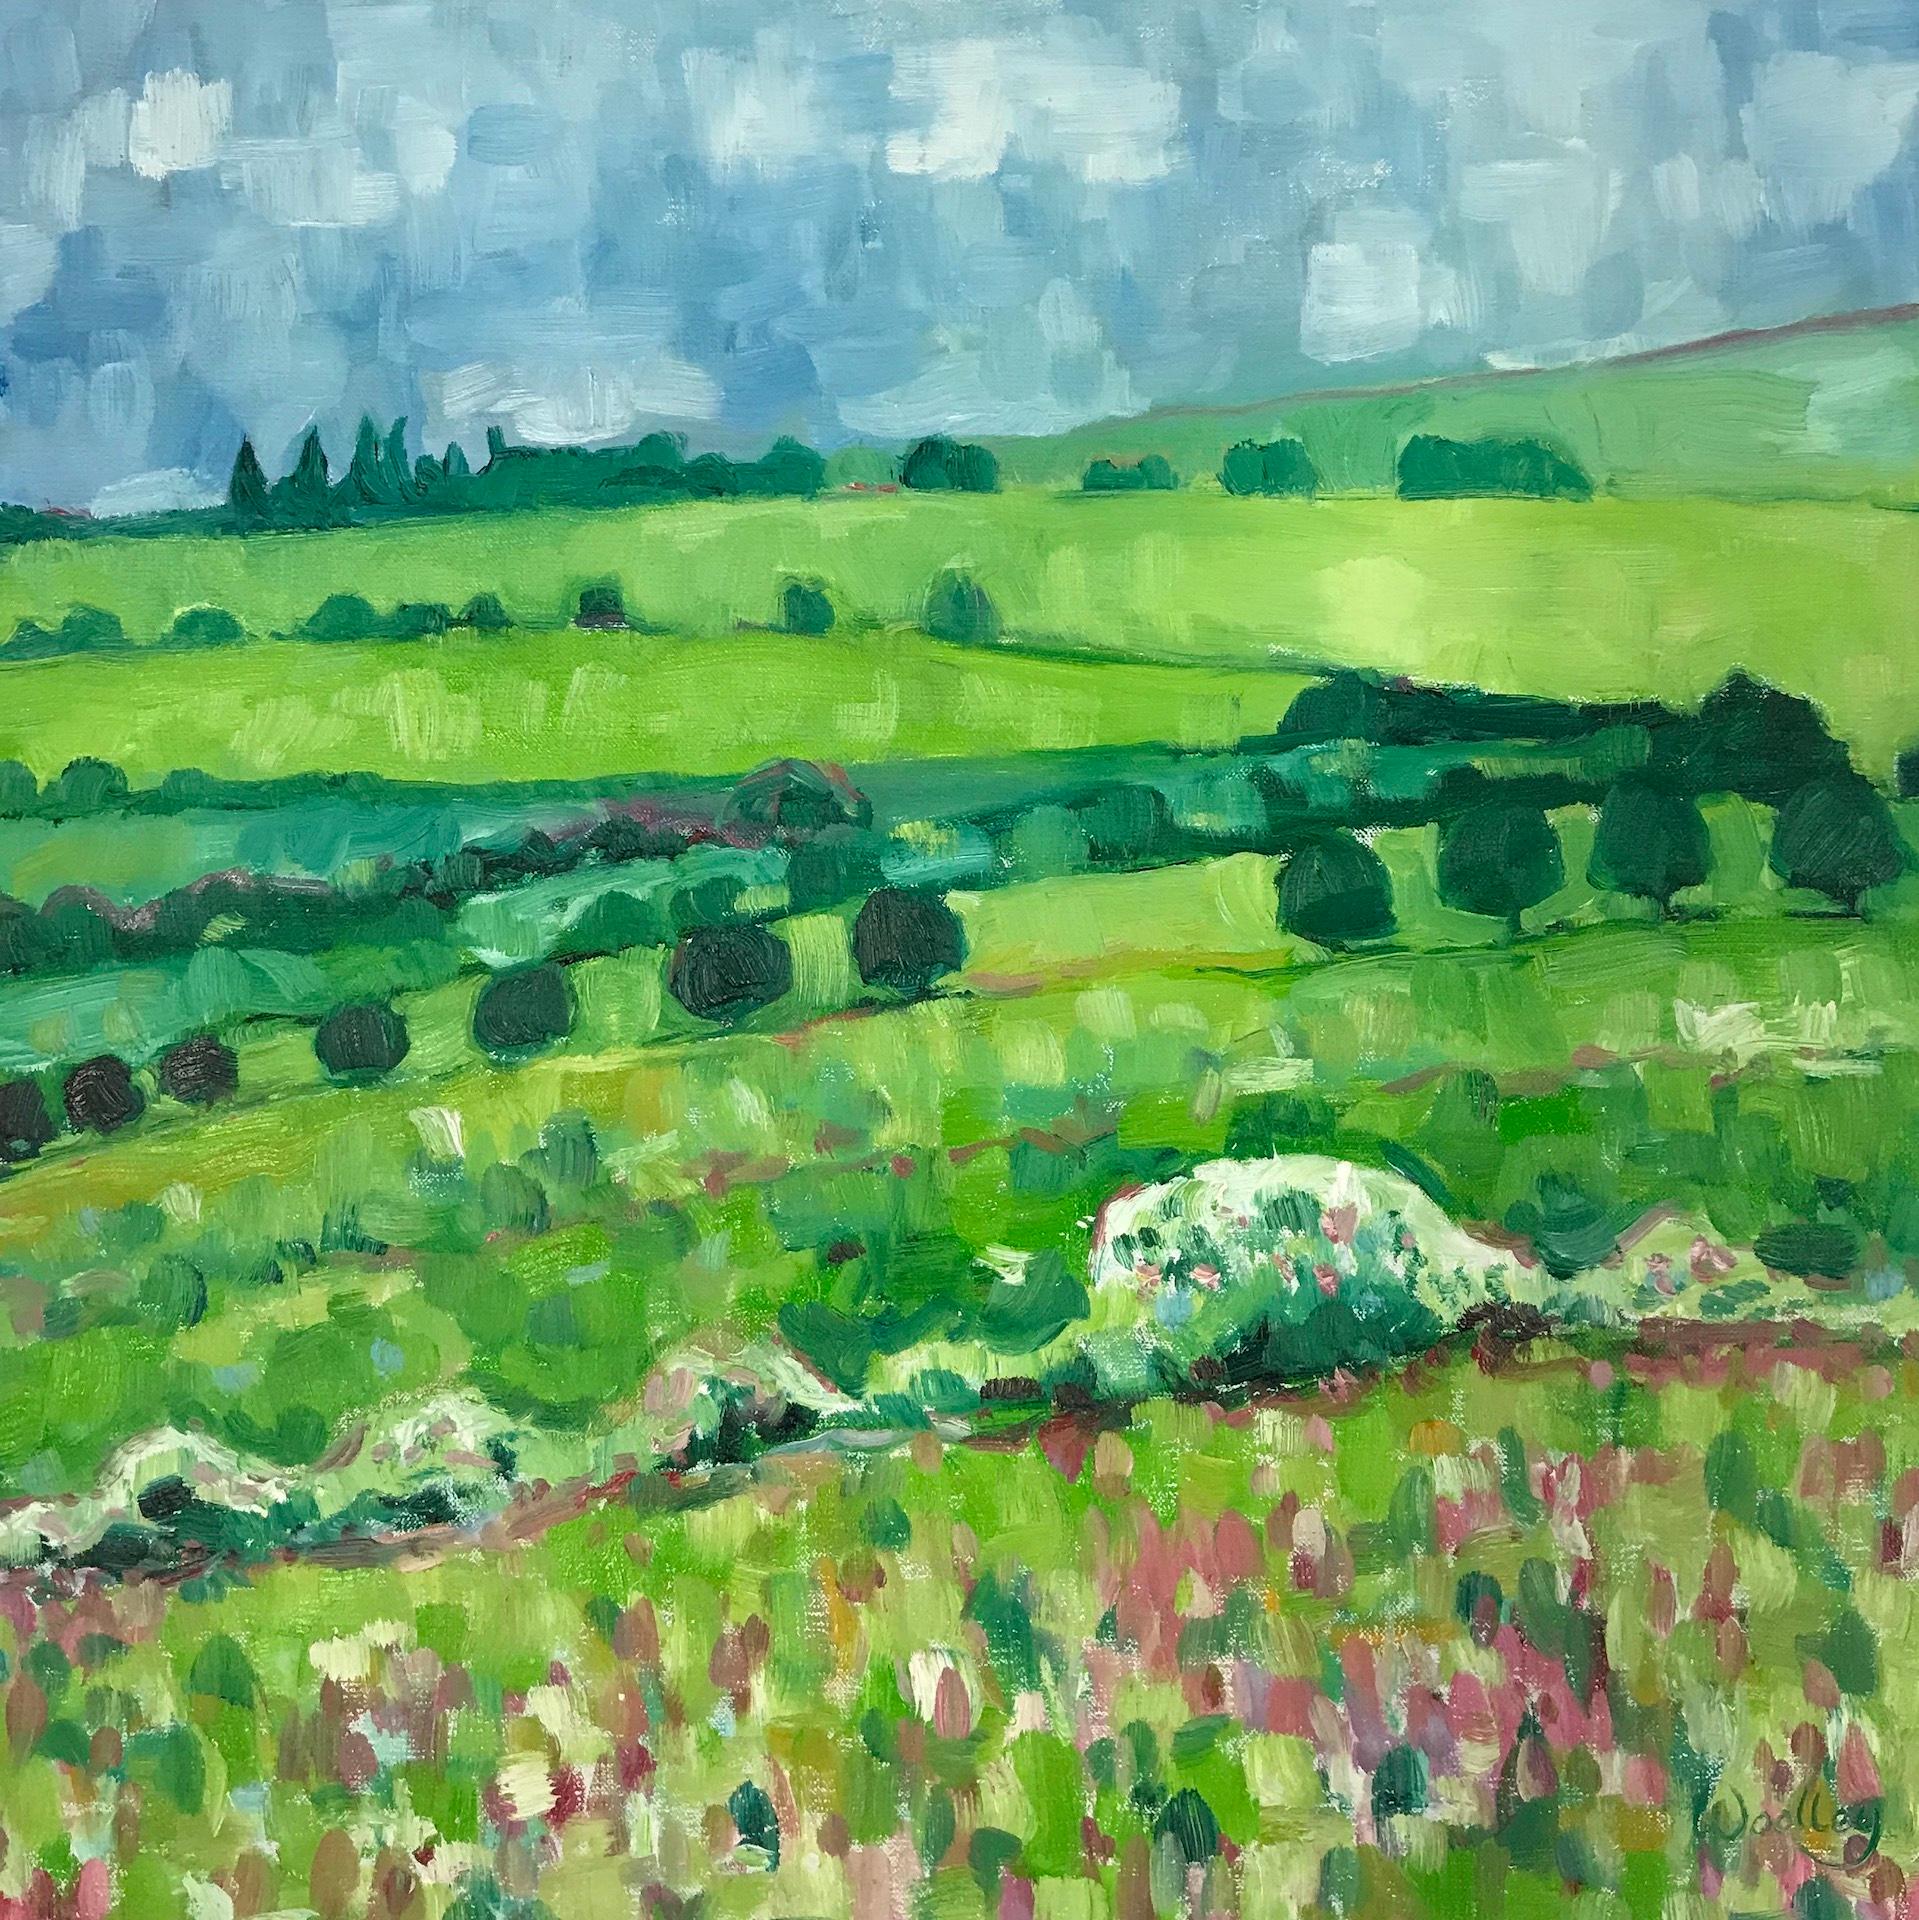 Eleanor Woolley
Views from Rollright
Original Painting
Oil Paint on Canvas
Canvas Size: H 50cm x W 50cm x D 2cm
Signed
Sold Unframed
Ready to Hang

(Please note that in situ images are purely an indication of how a piece may look).

Views from